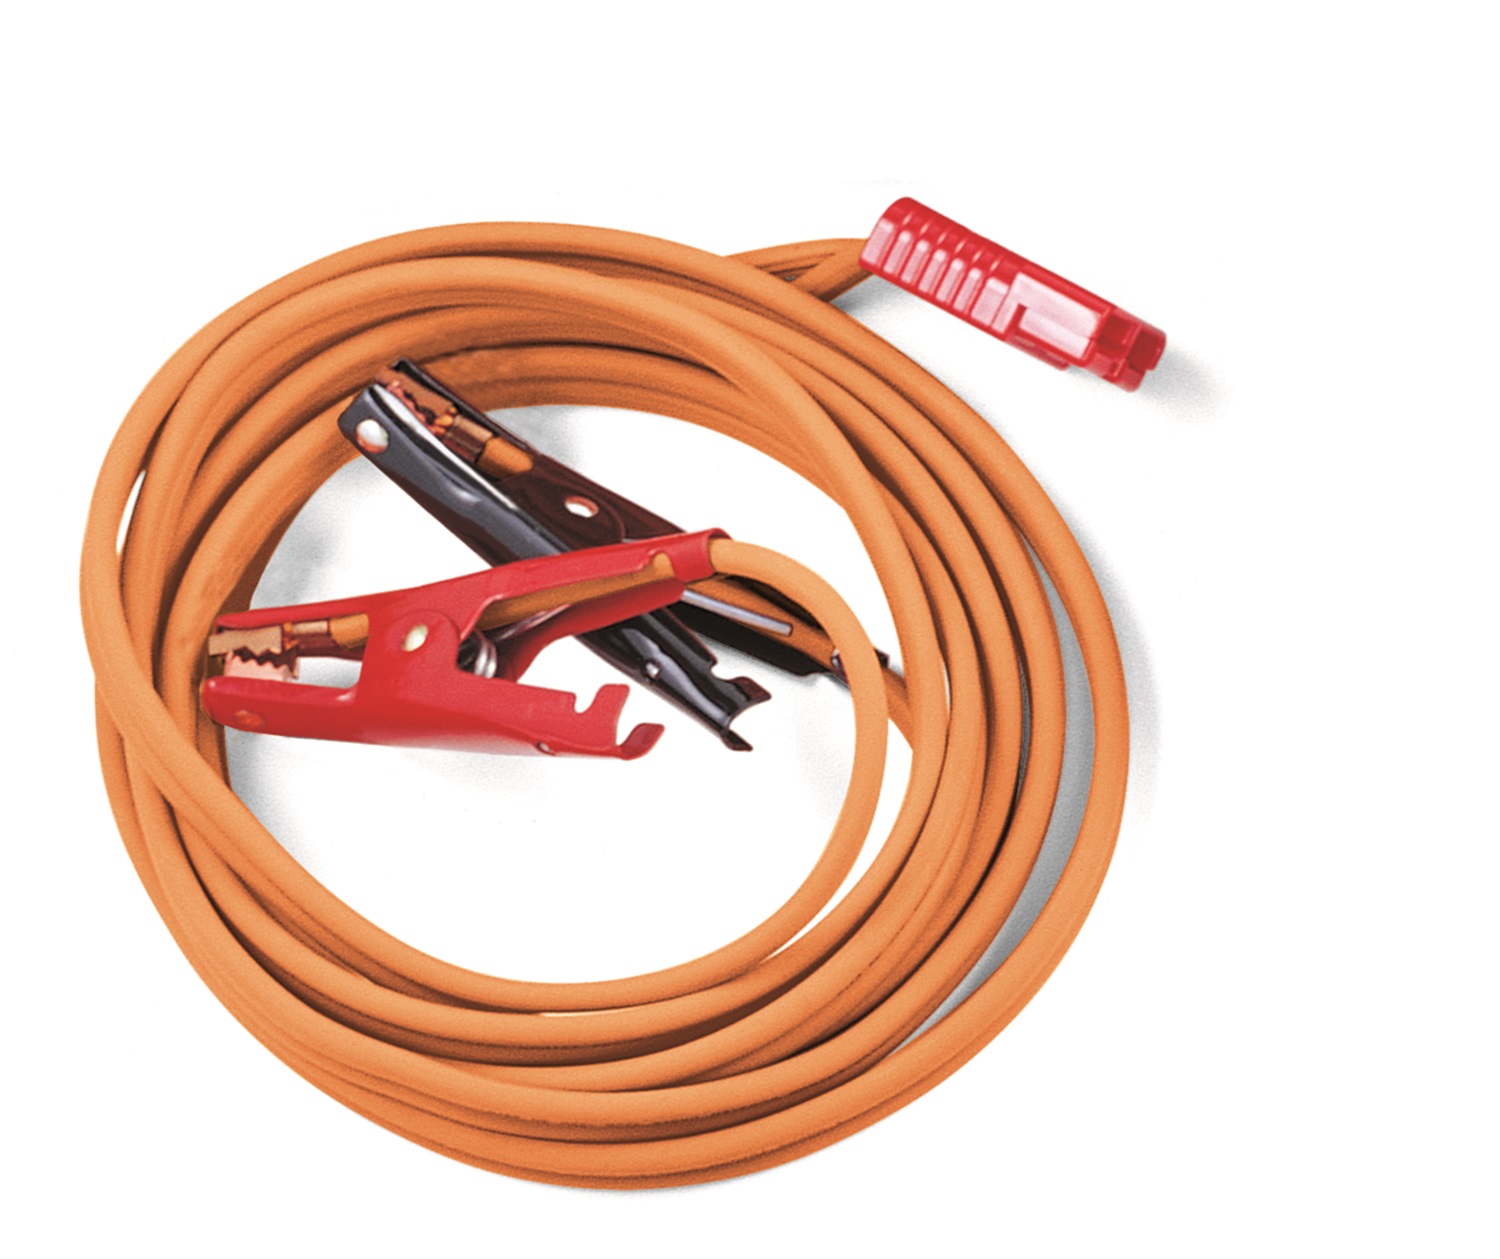 Warn Warn 26769 Quick Connect Booster Cable Kit